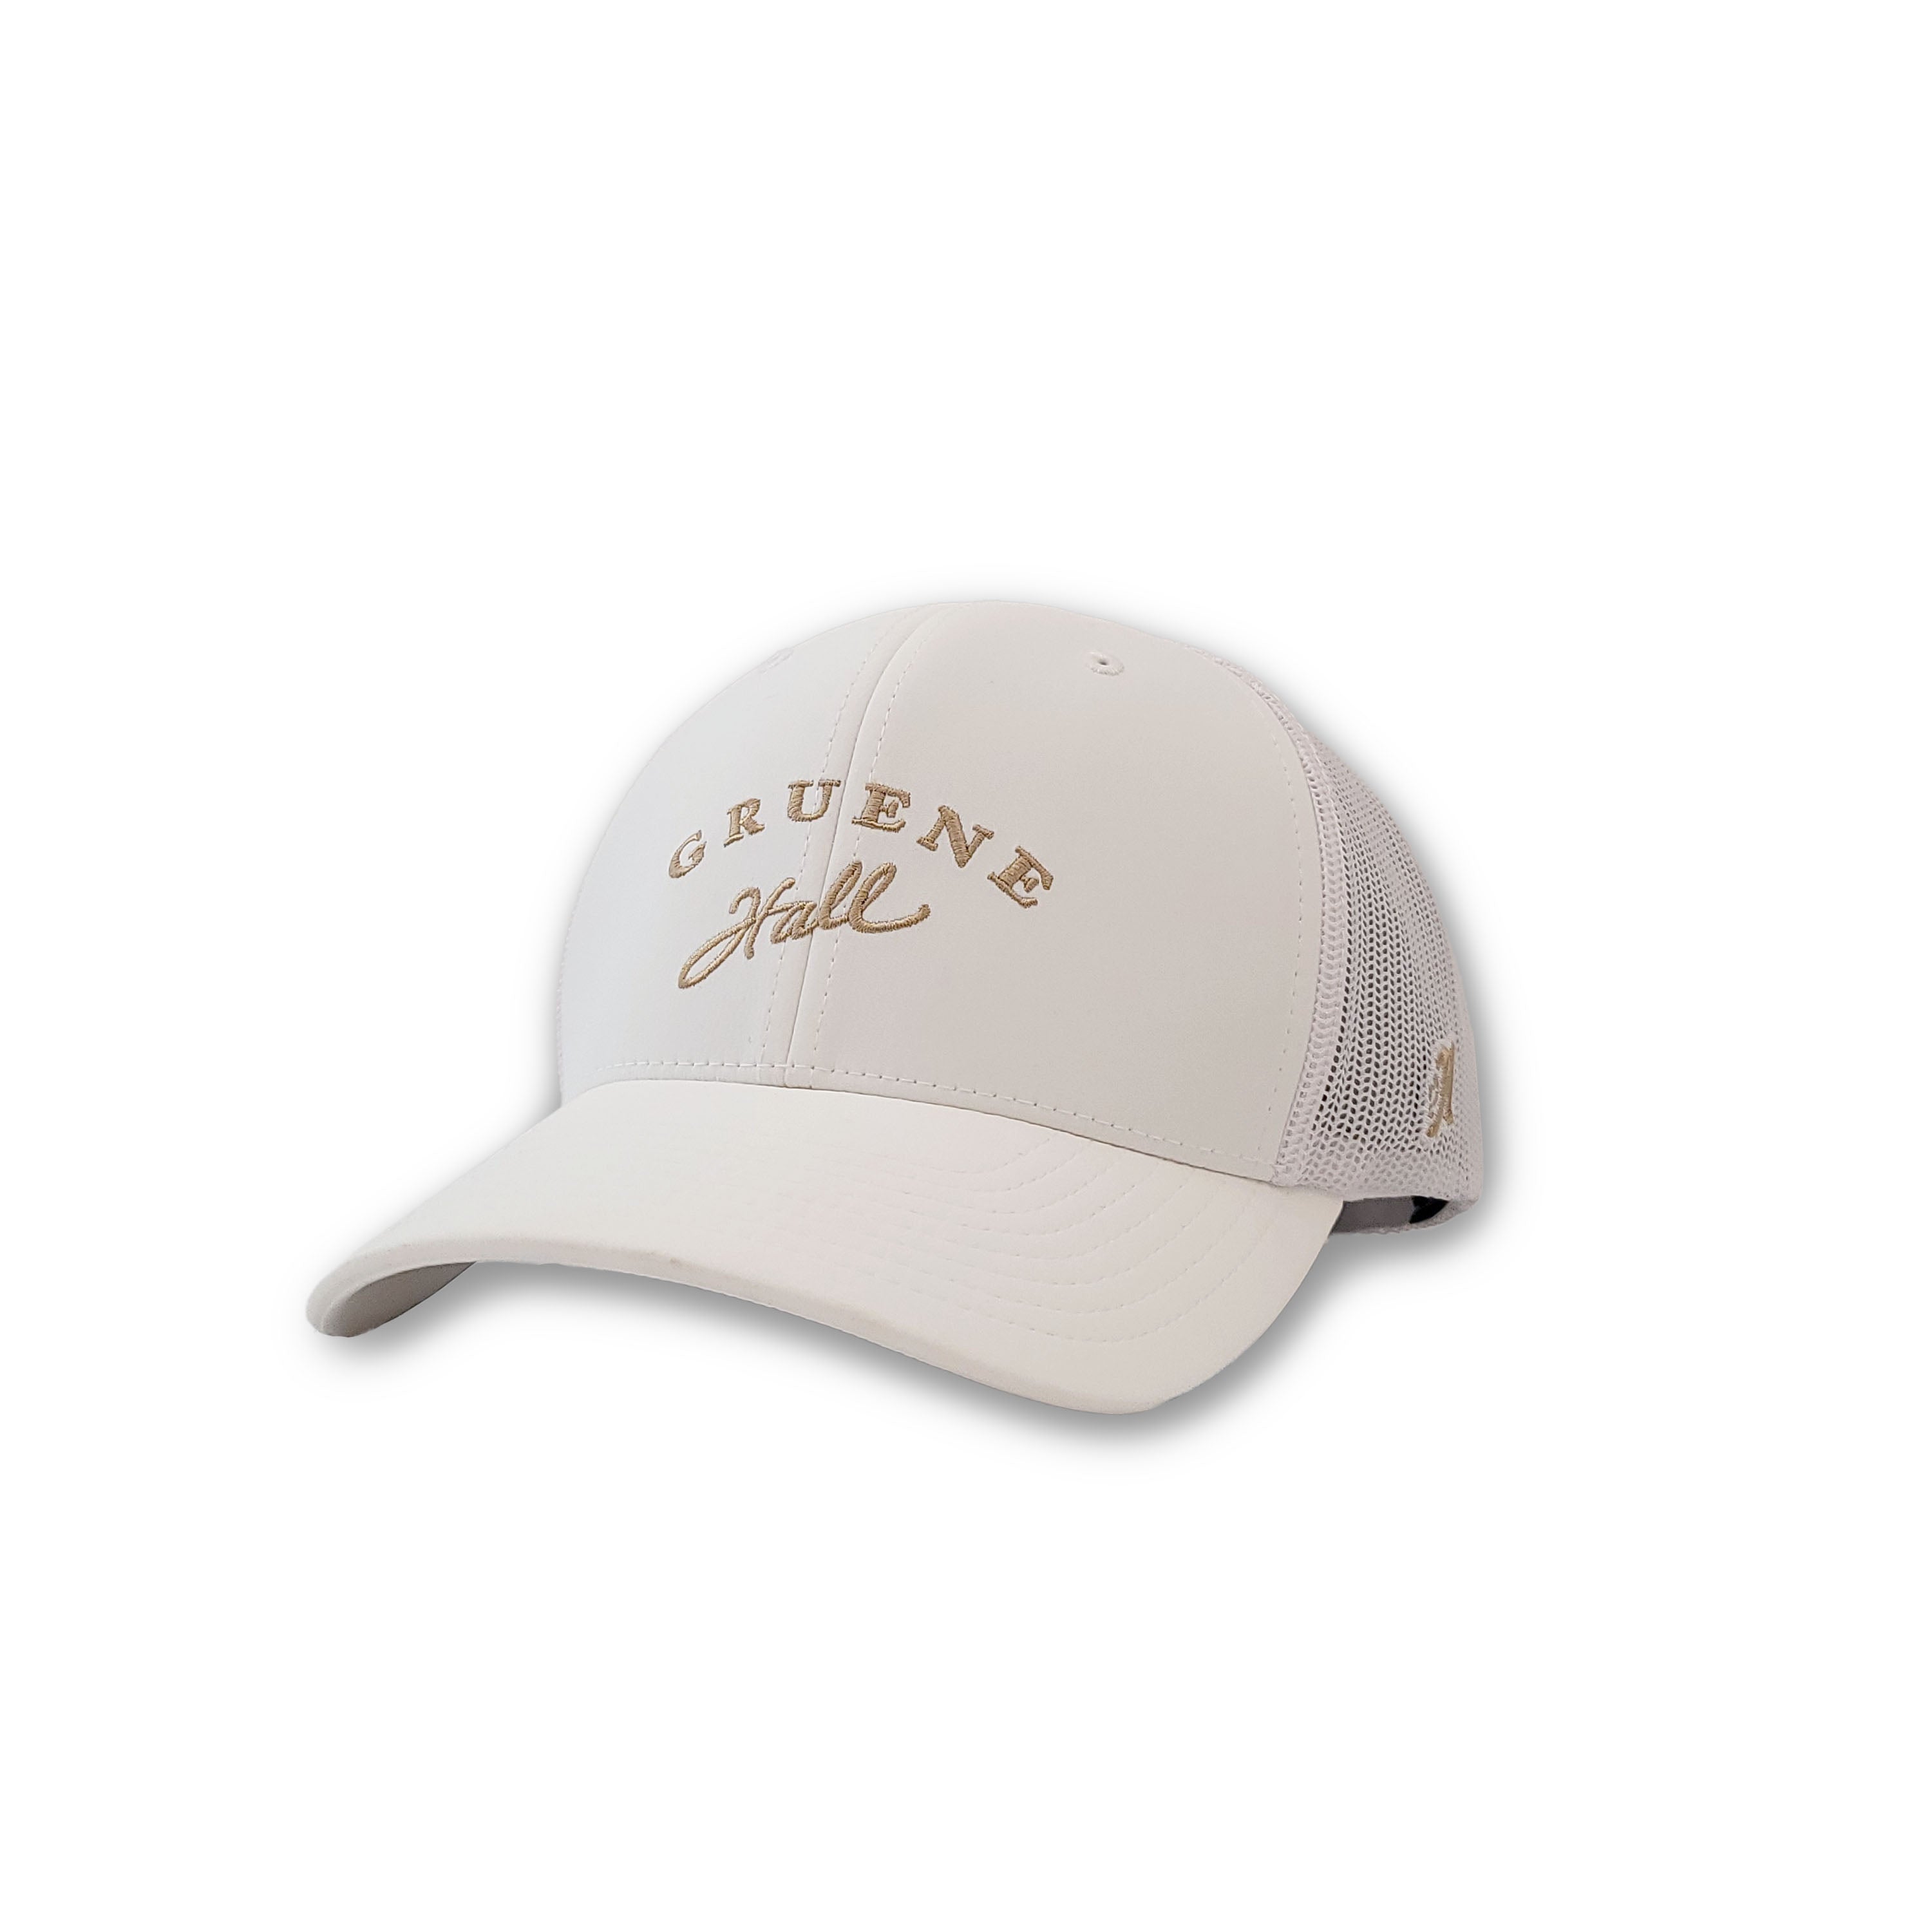 Hooey x Gruene Hall Embroidered Logo Cap #GH2415T-WH